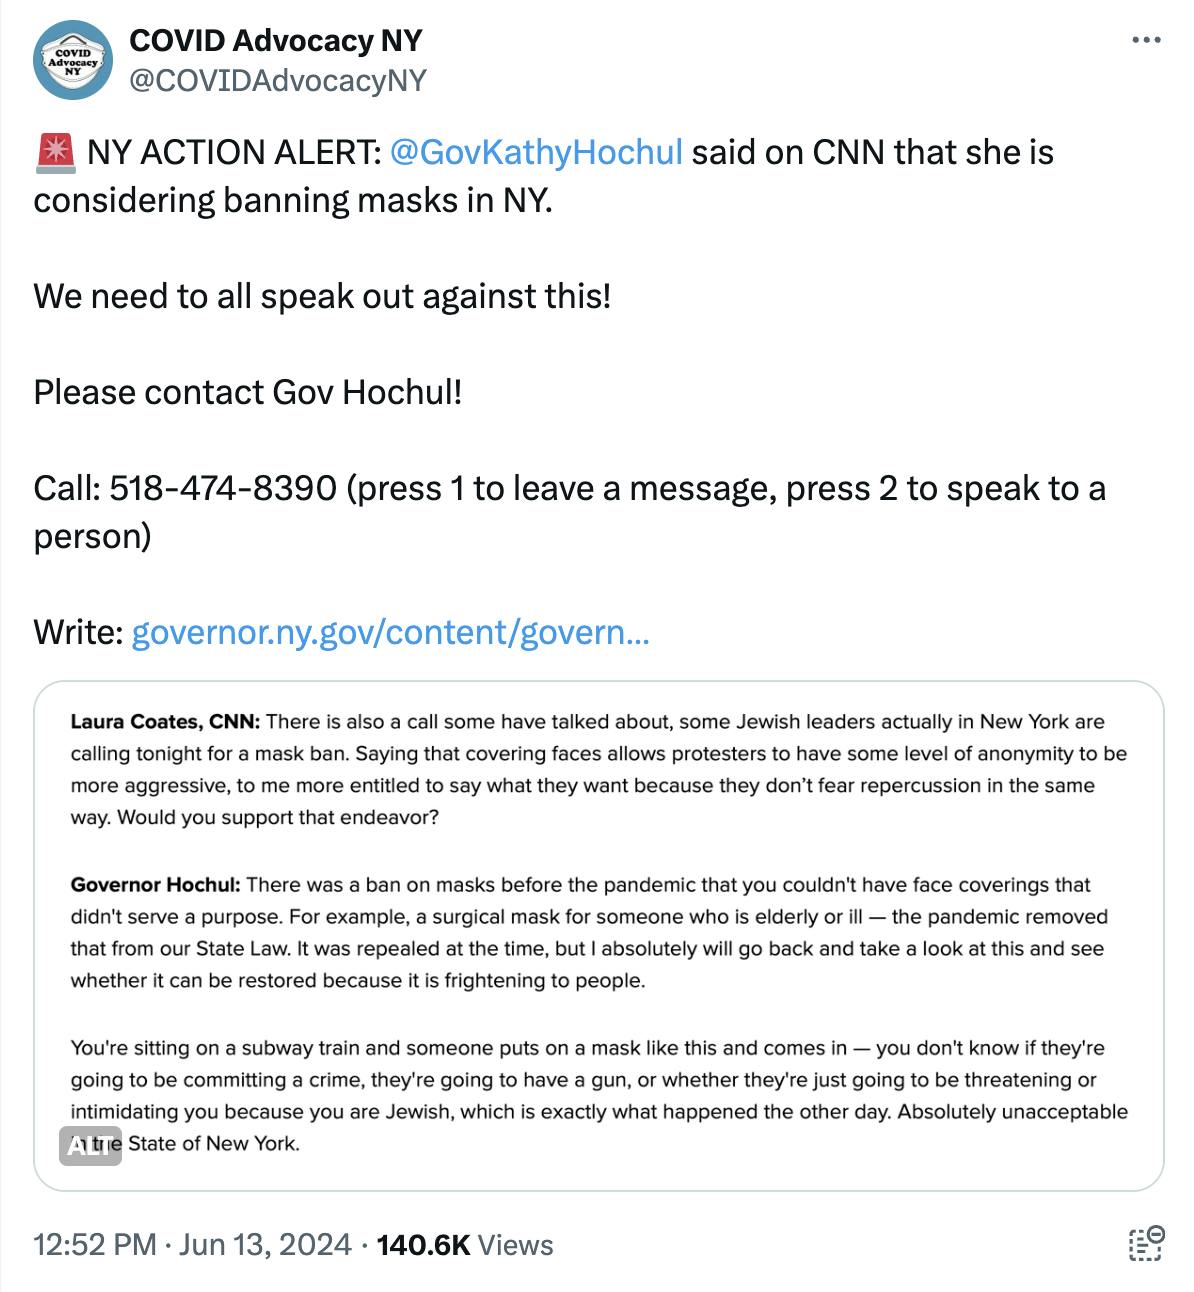 Tweet Screenshot COVID Advocacy NY: NY ACTION ALERT: @GovKathyHochul said on CNN that she is considering banning masks in NY. We need to all speak out against this! Please contact Gov Hochul! Call: 518-474-8390 (press 1 to leave a message, press 2 to speak to a person) Write: https://governor.ny.gov/content/govern